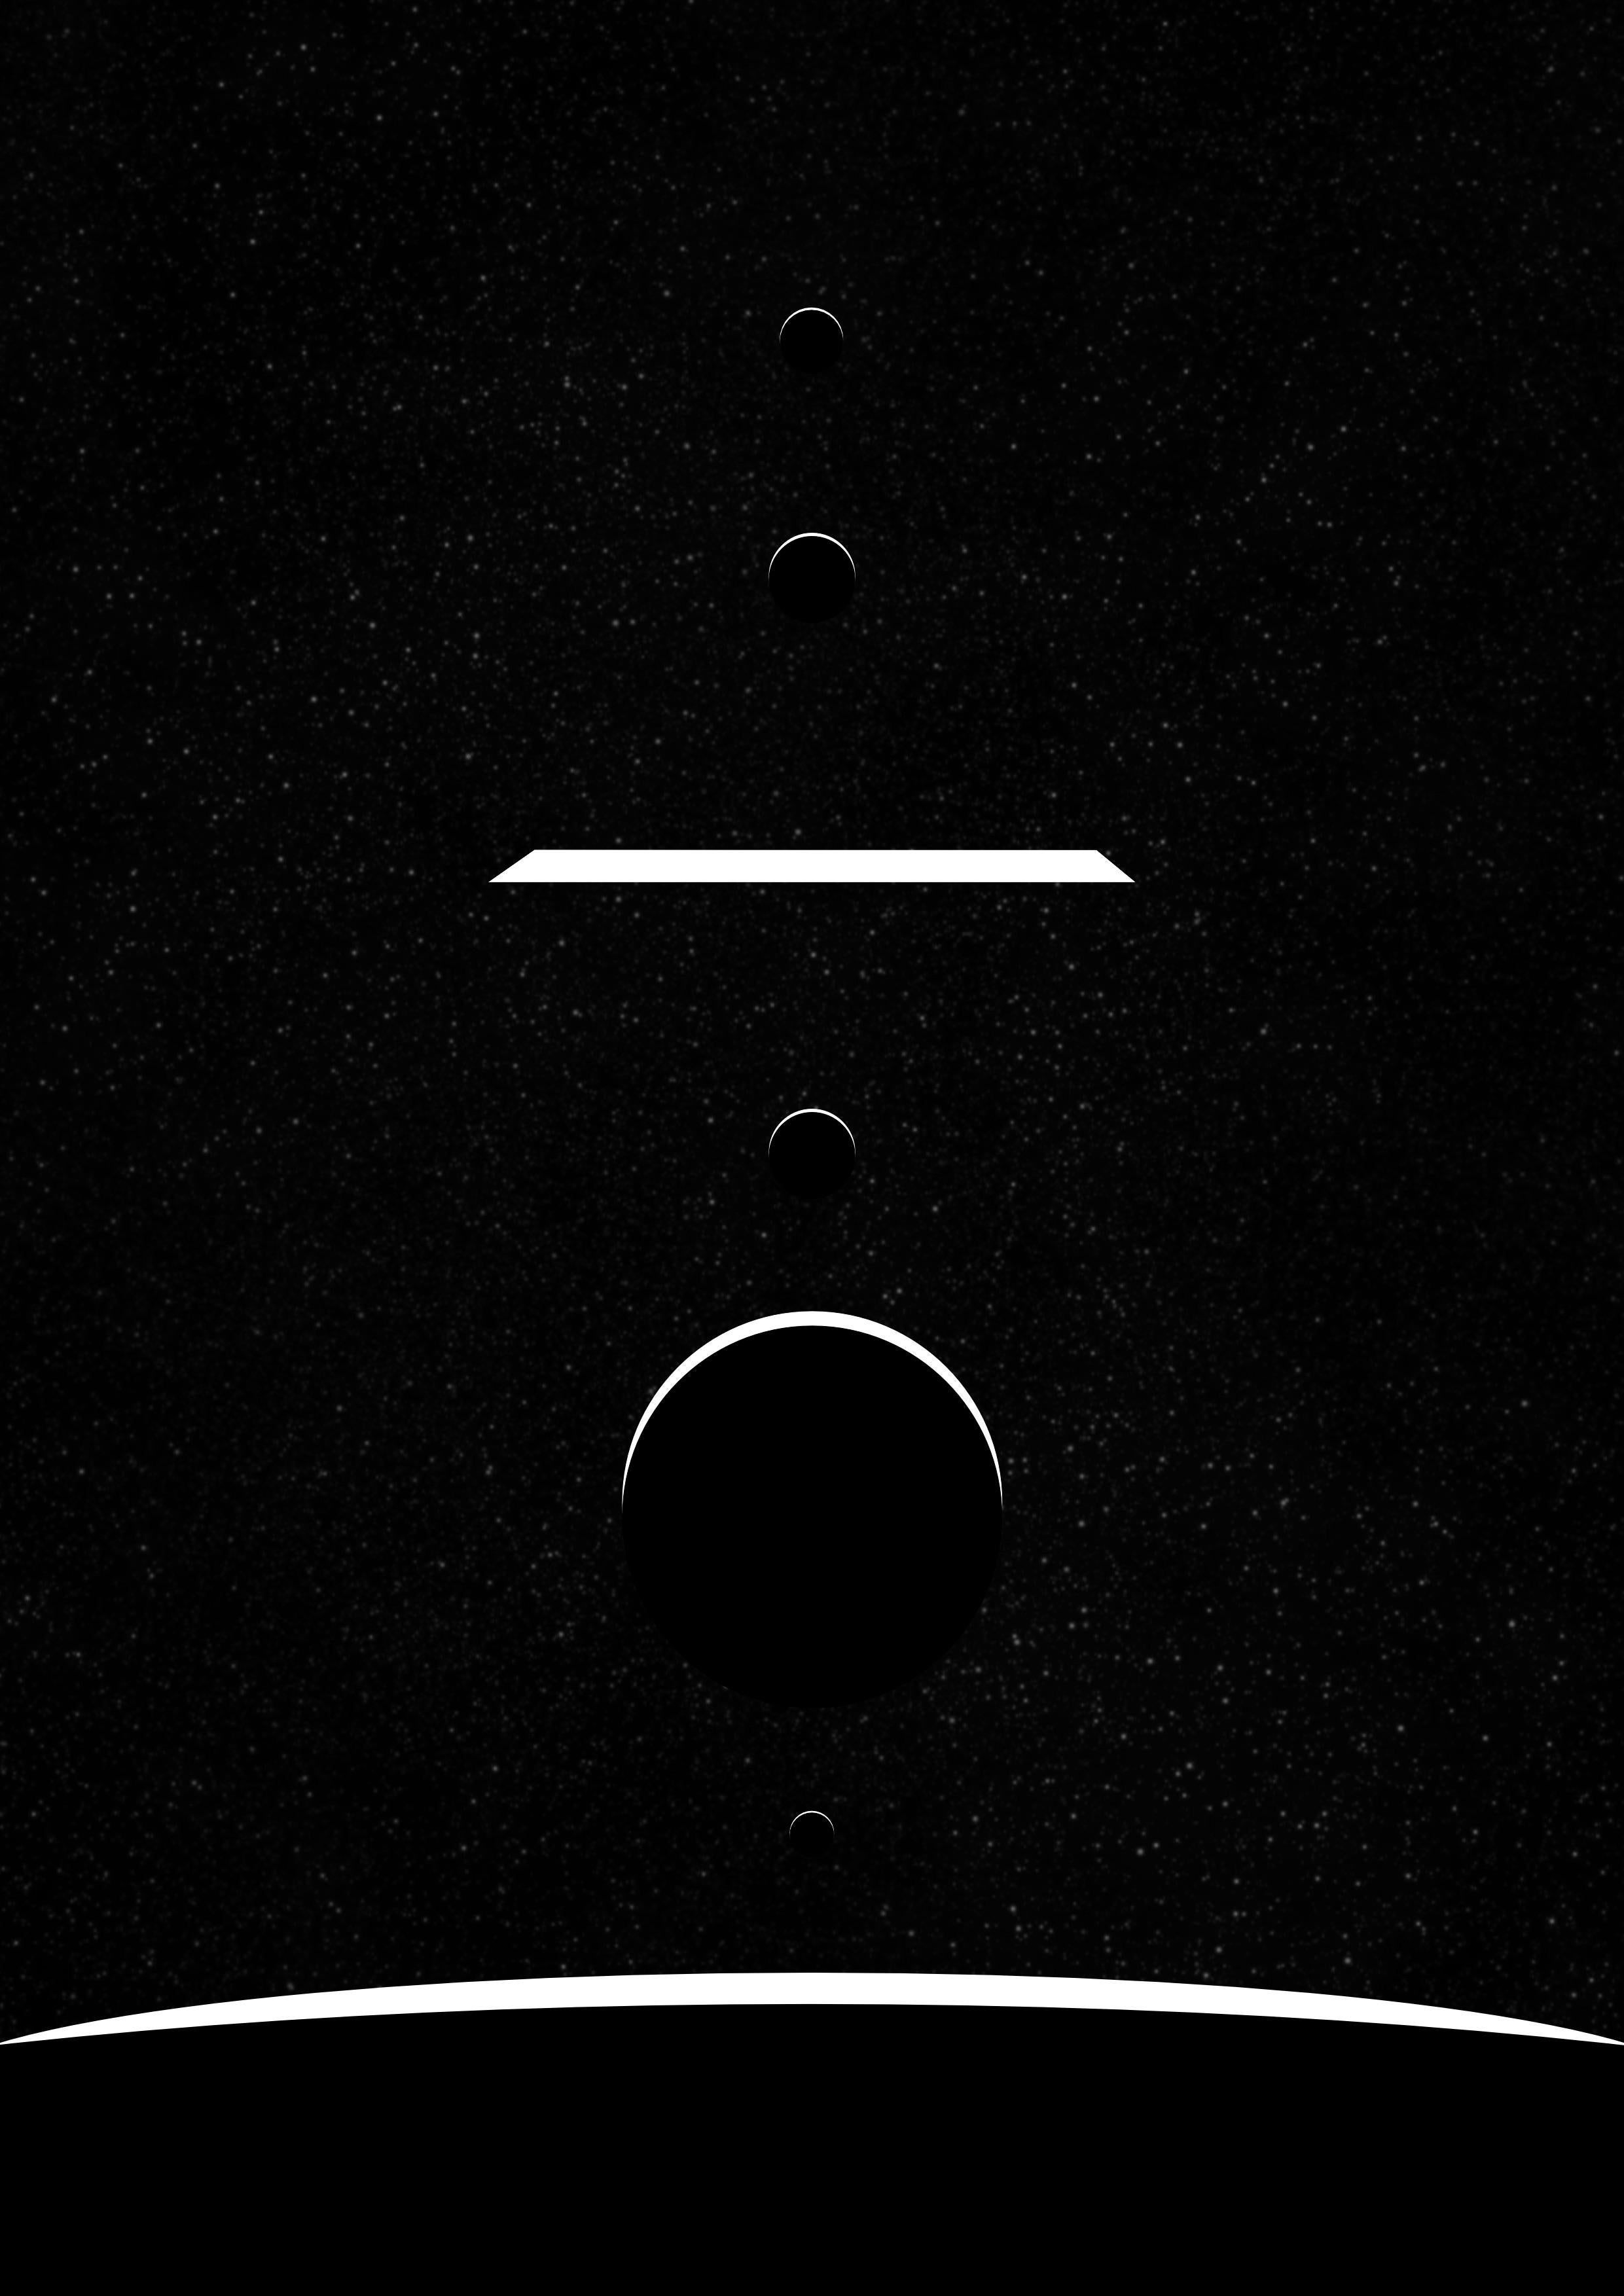 2001: A Space Odyssey Wallpapers